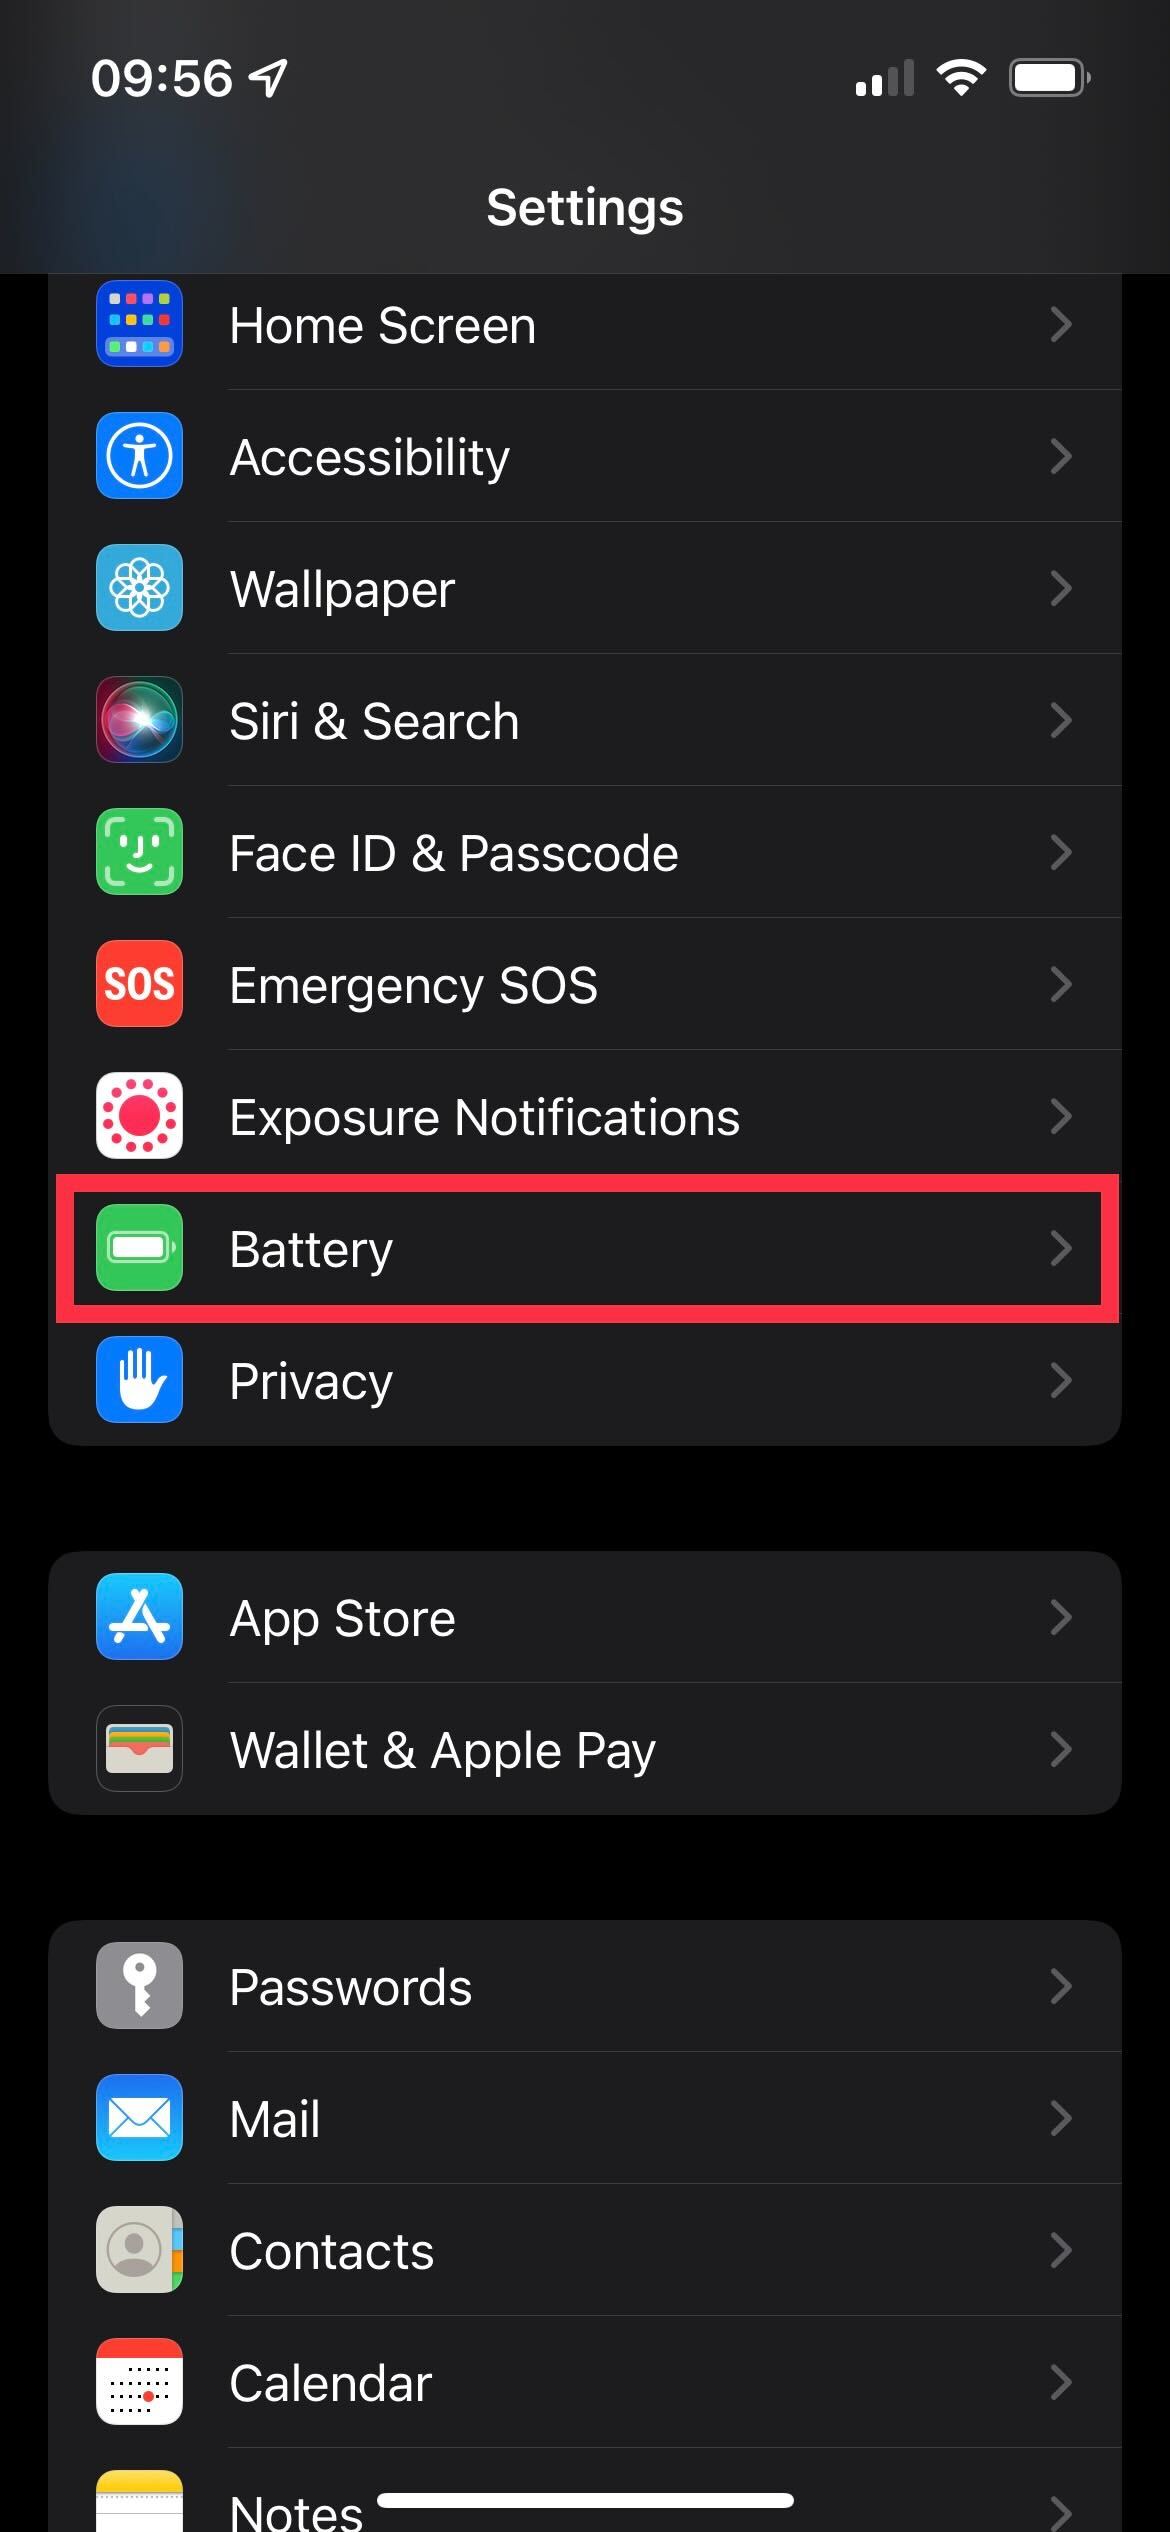 The battery setting in the Settings app